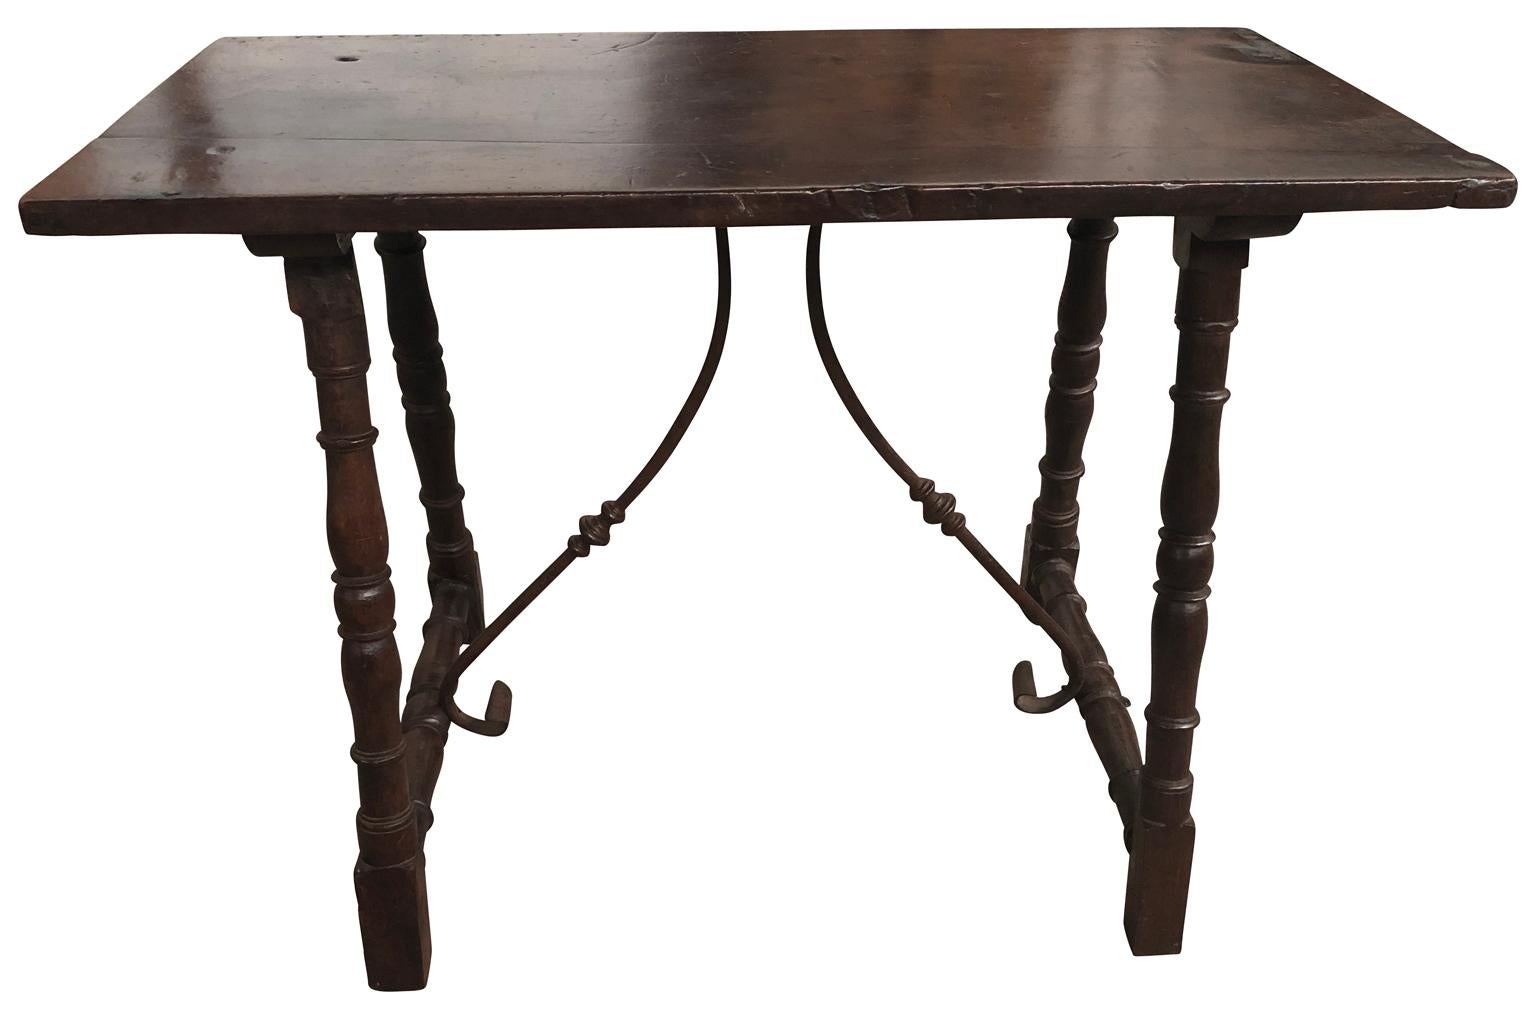 A very charming early 19th century console table from Spain. Beautifully constructed from walnut and chestnut with hand forged iron stretchers. Wonderful patina - warm and luminous.